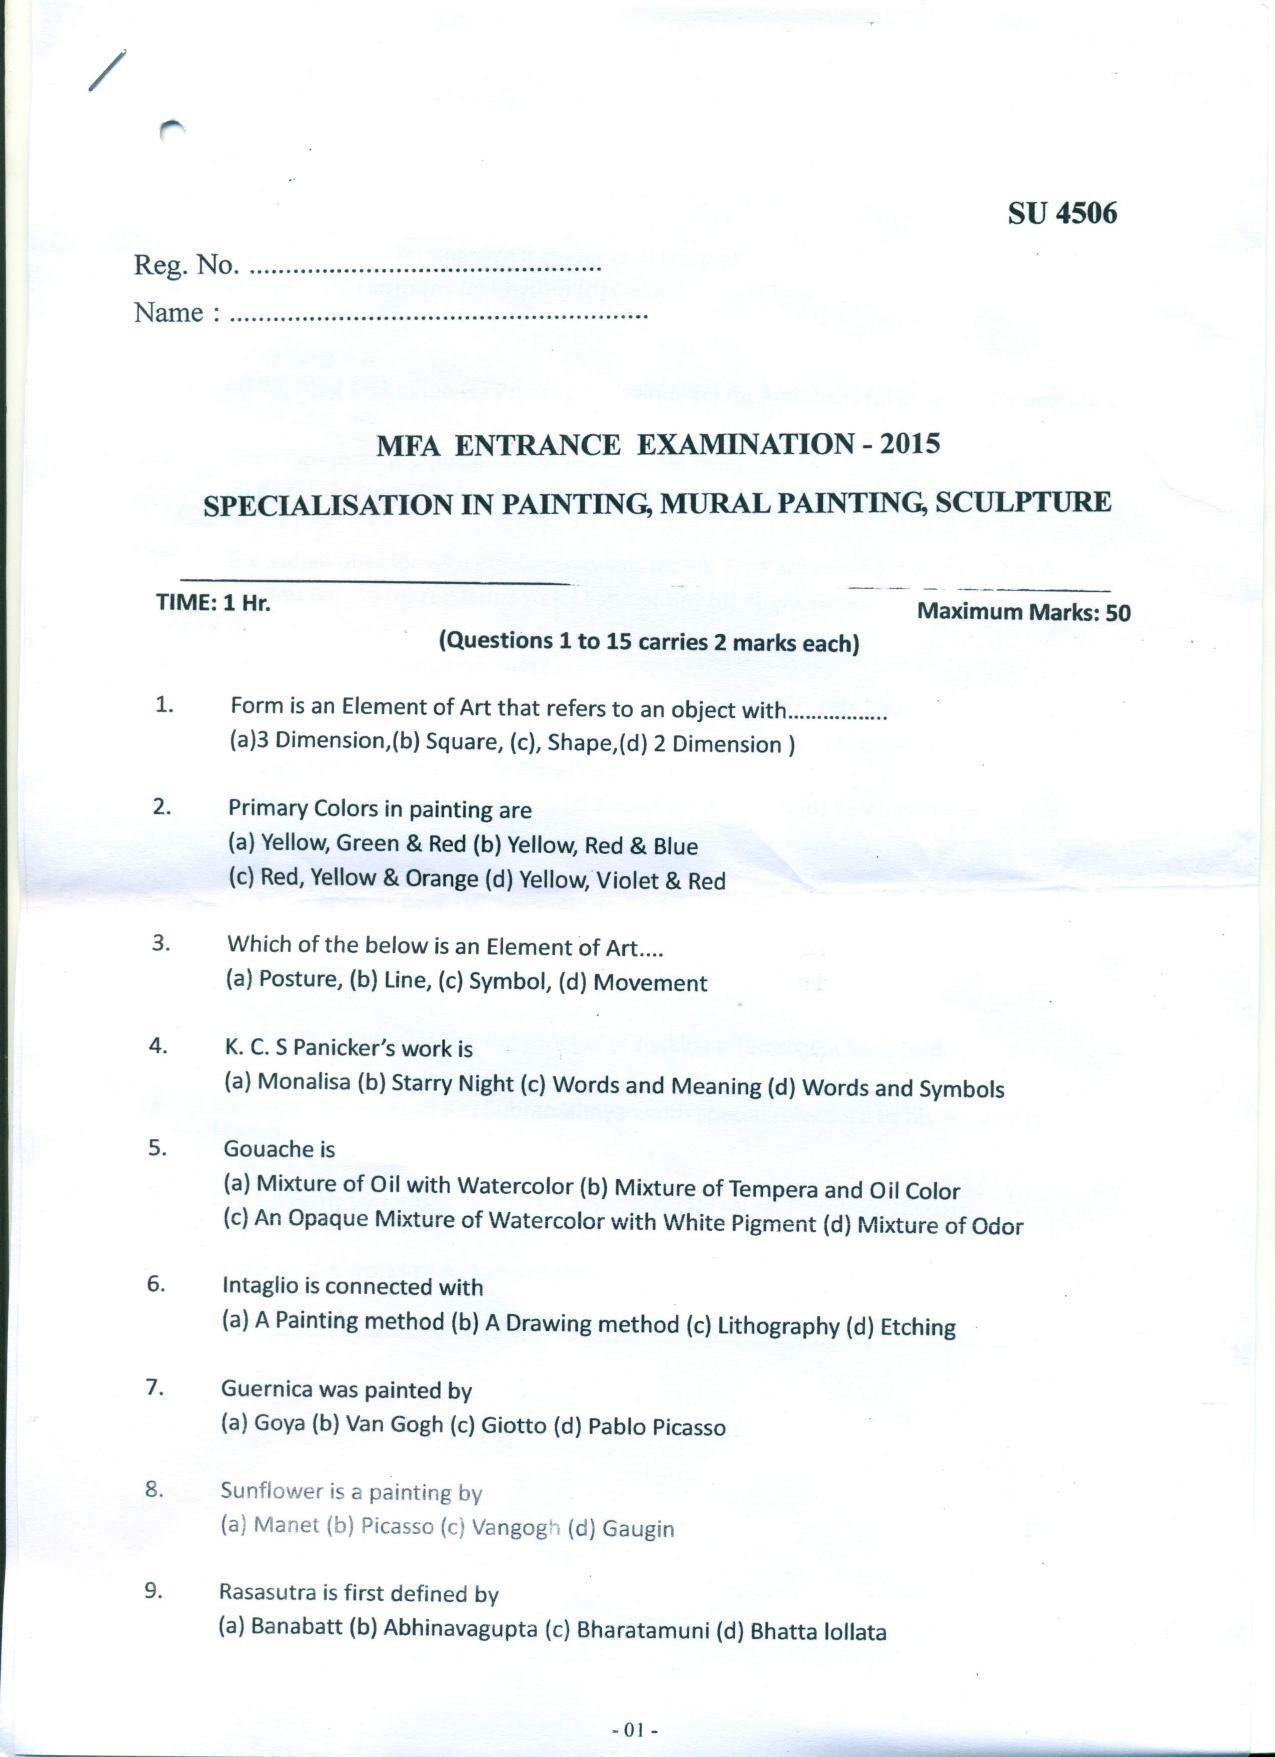 SSUS Entrance Exam M.F.A  SPECIALISATION  IN PAINTING ,MURAL PAINTING ,SCULPTURE 2015 Question Paper - Page 1